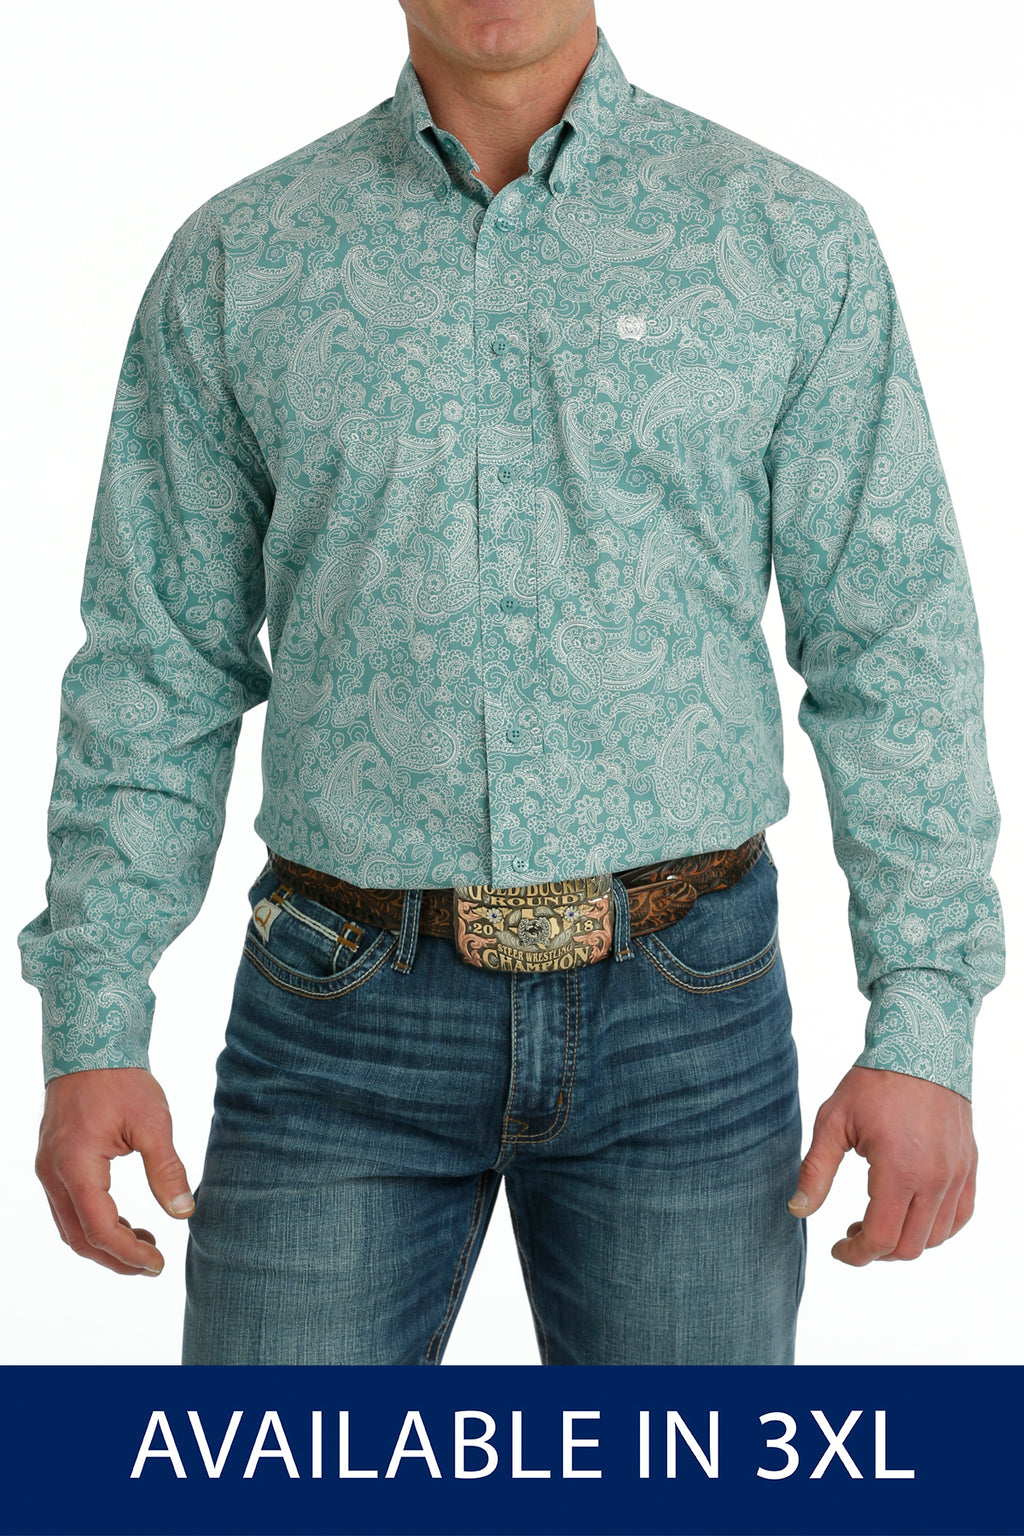 CINCH Men's Turquoise and White Paisley Print Button-Down Western Shirt